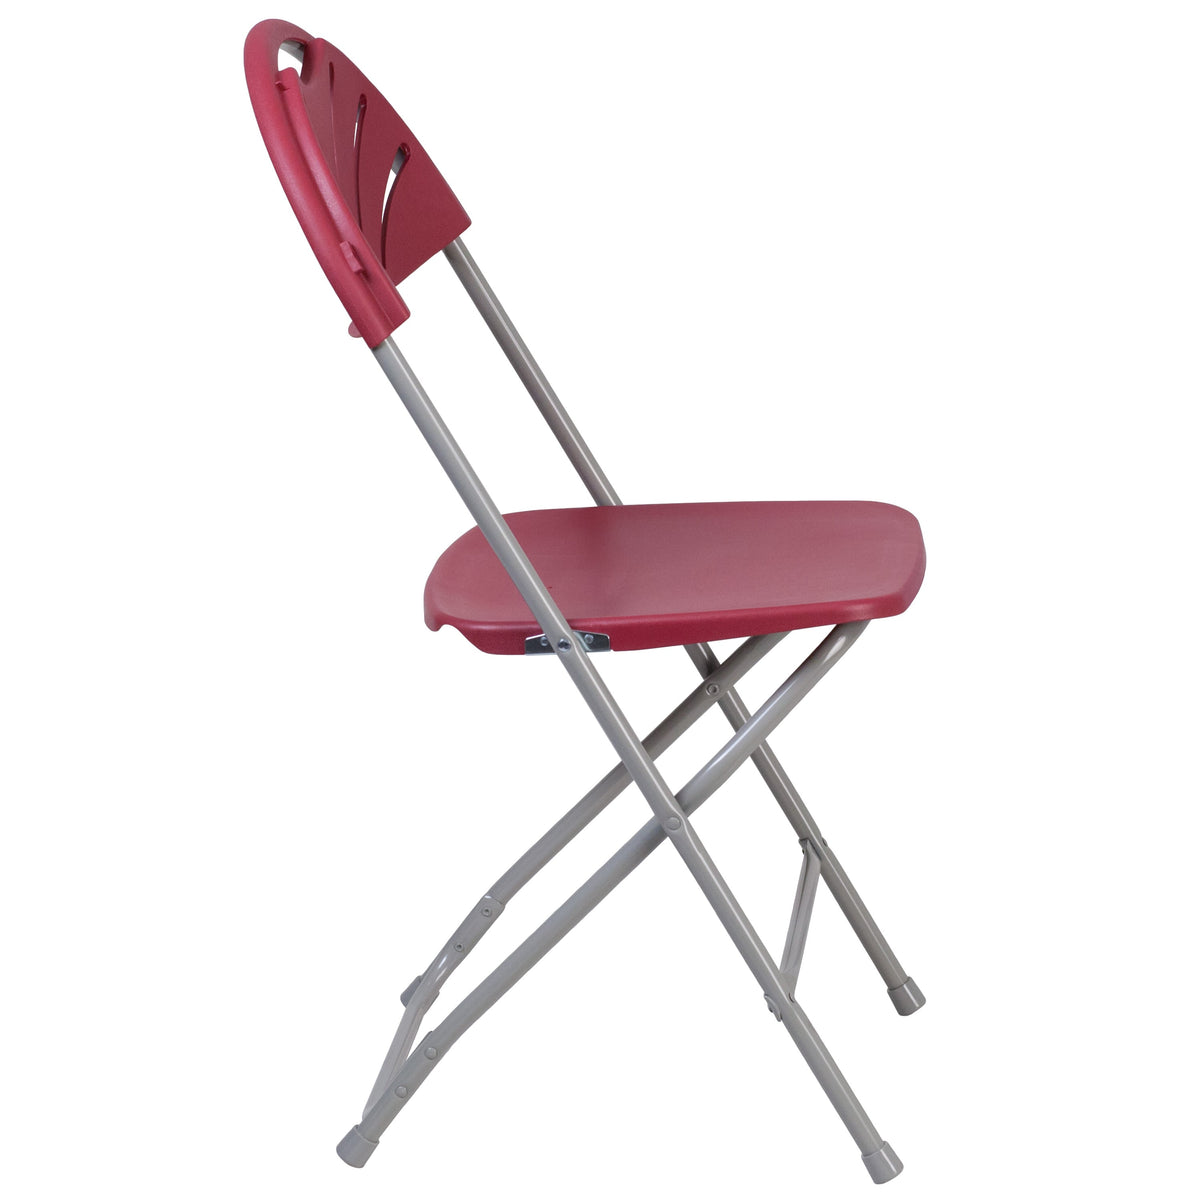 Burgundy |#| 650 lb. Capacity Burg Plastic Fan Back Folding Chair - Commercial & Event Chairs